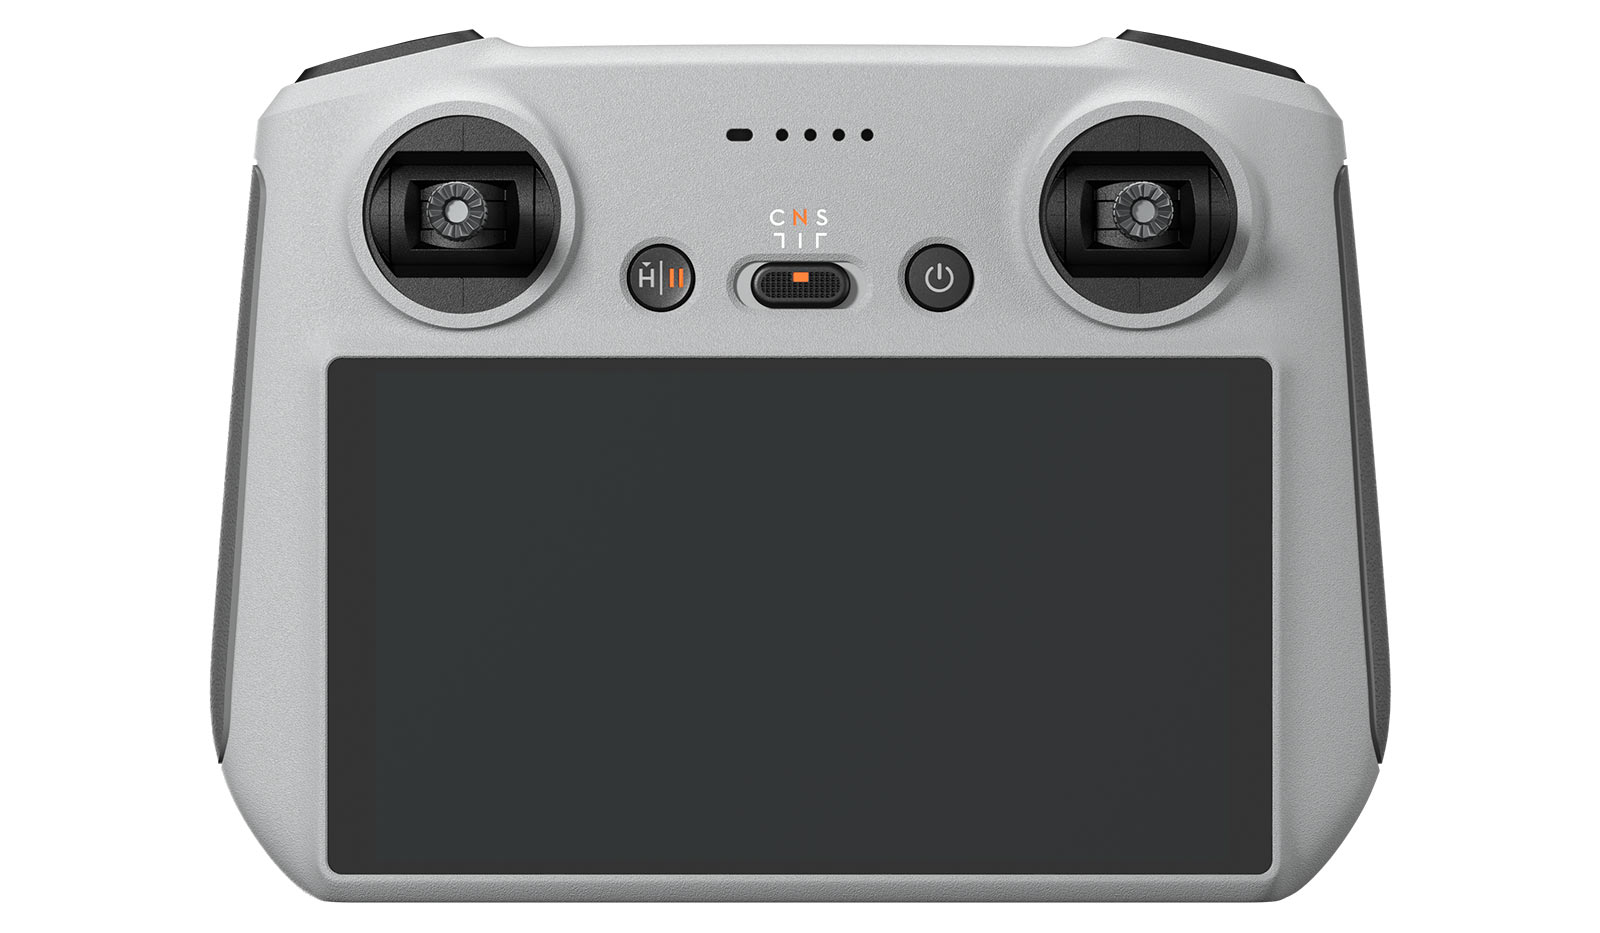 new DJI RC remote control with built in touch screen